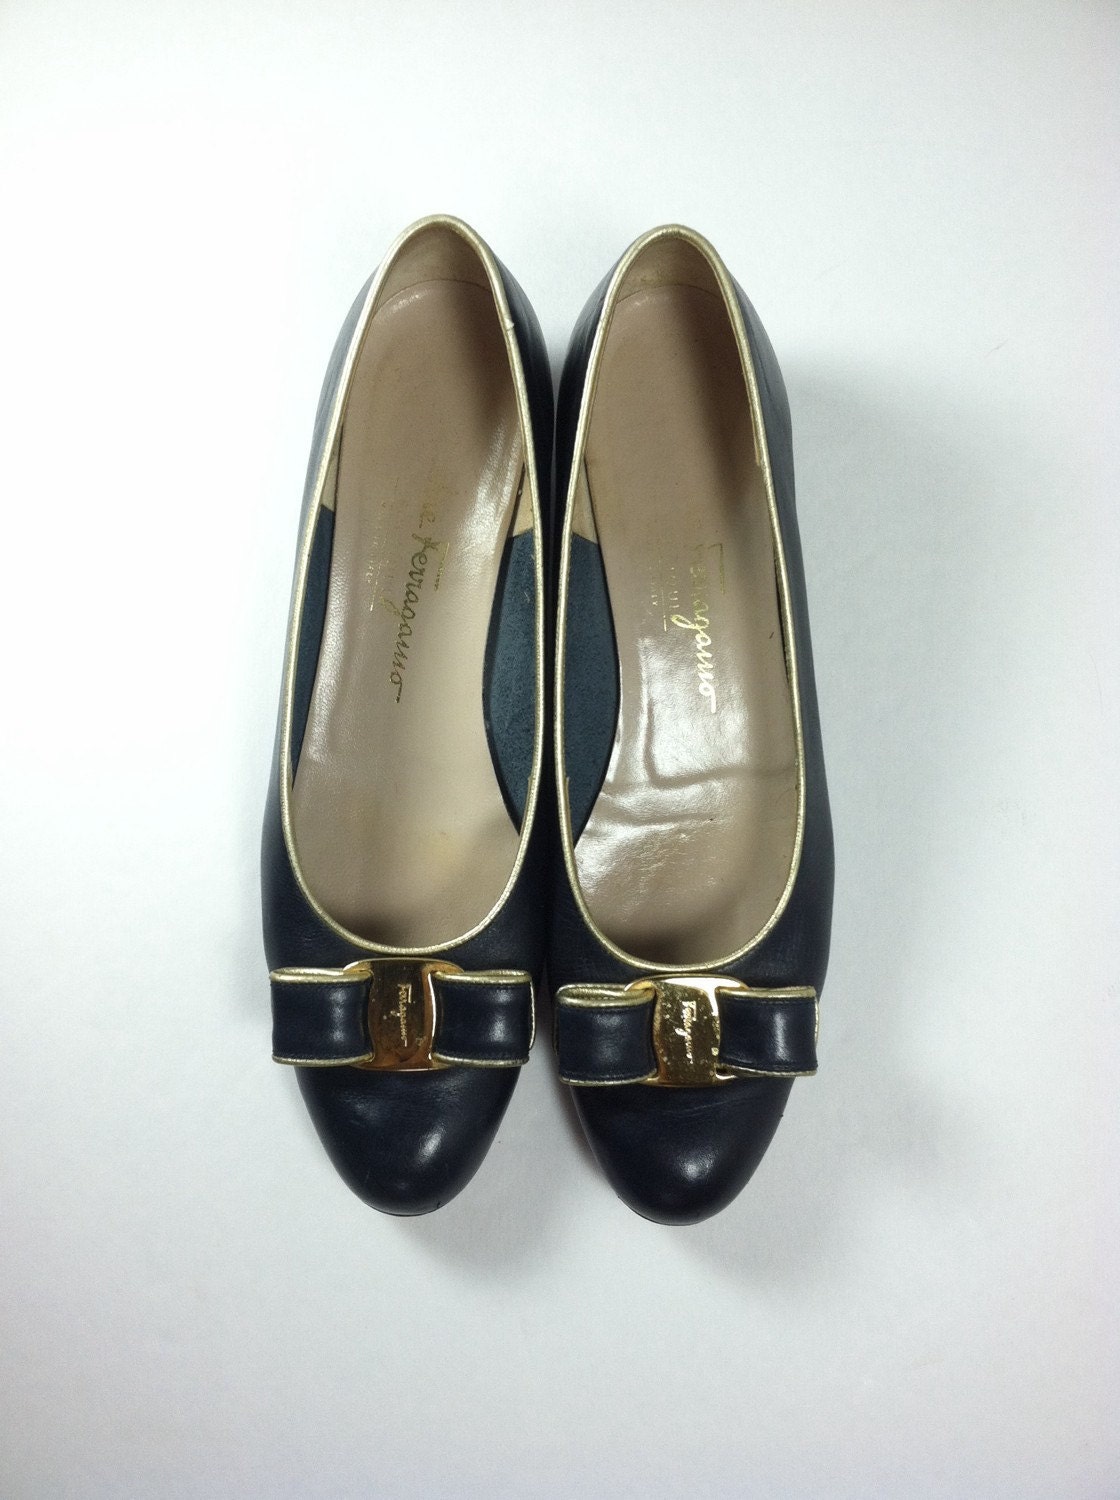 RESERVED Vintage Salvatore Ferragamo Shoes / Navy Leather